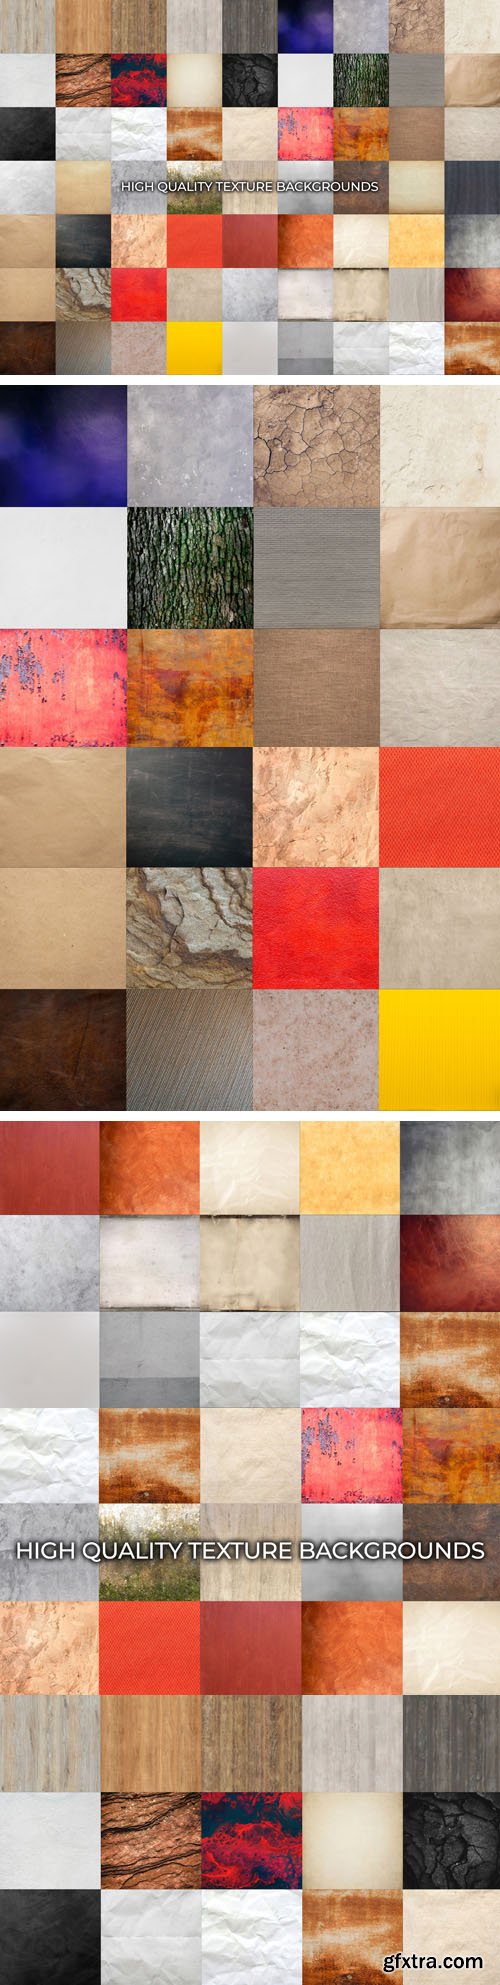 60 Nature Textures Collection